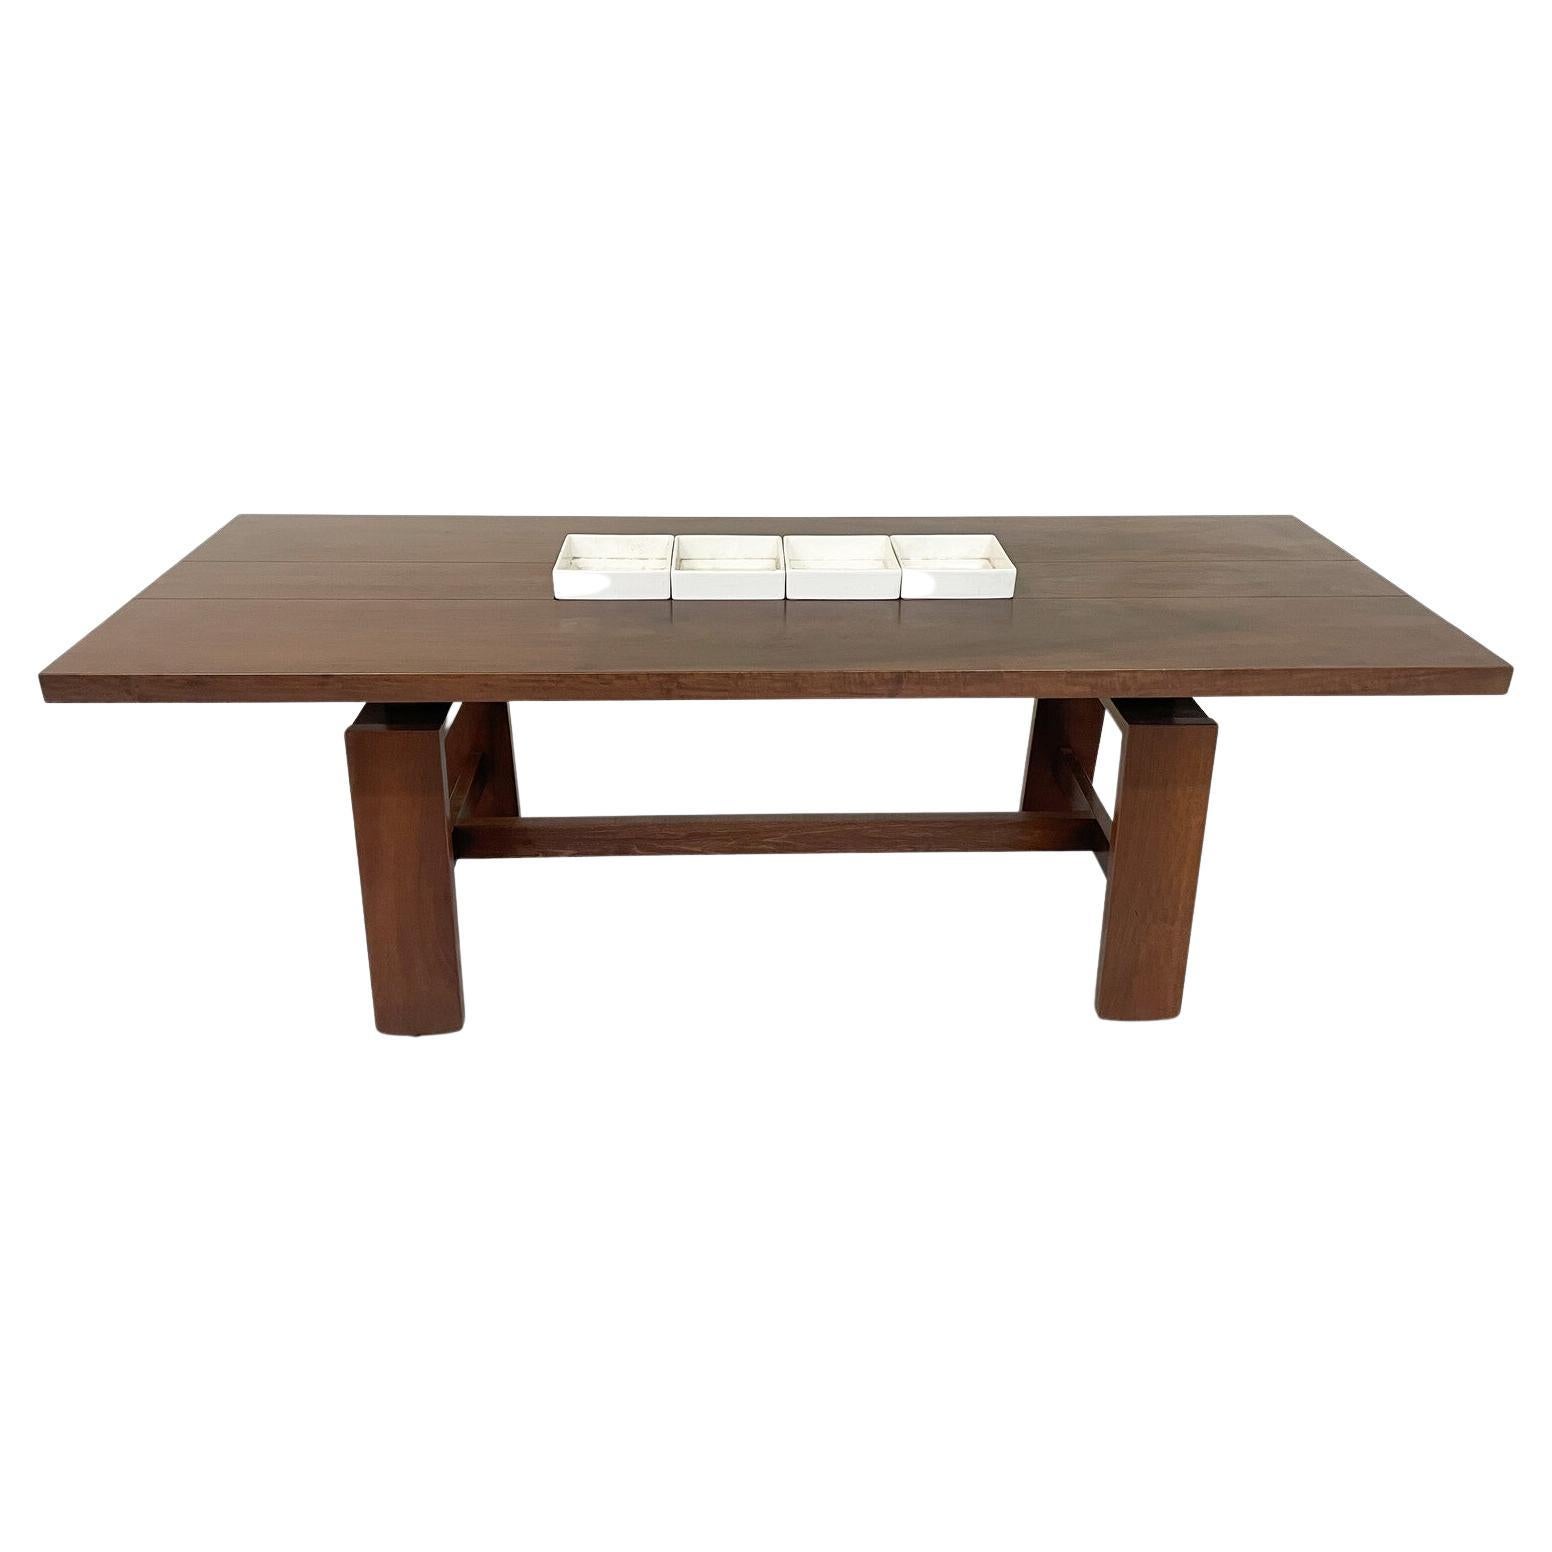 Mid-Century Modern Dining Table 611 by Silvio Coppola for Bernini, 1966 For Sale